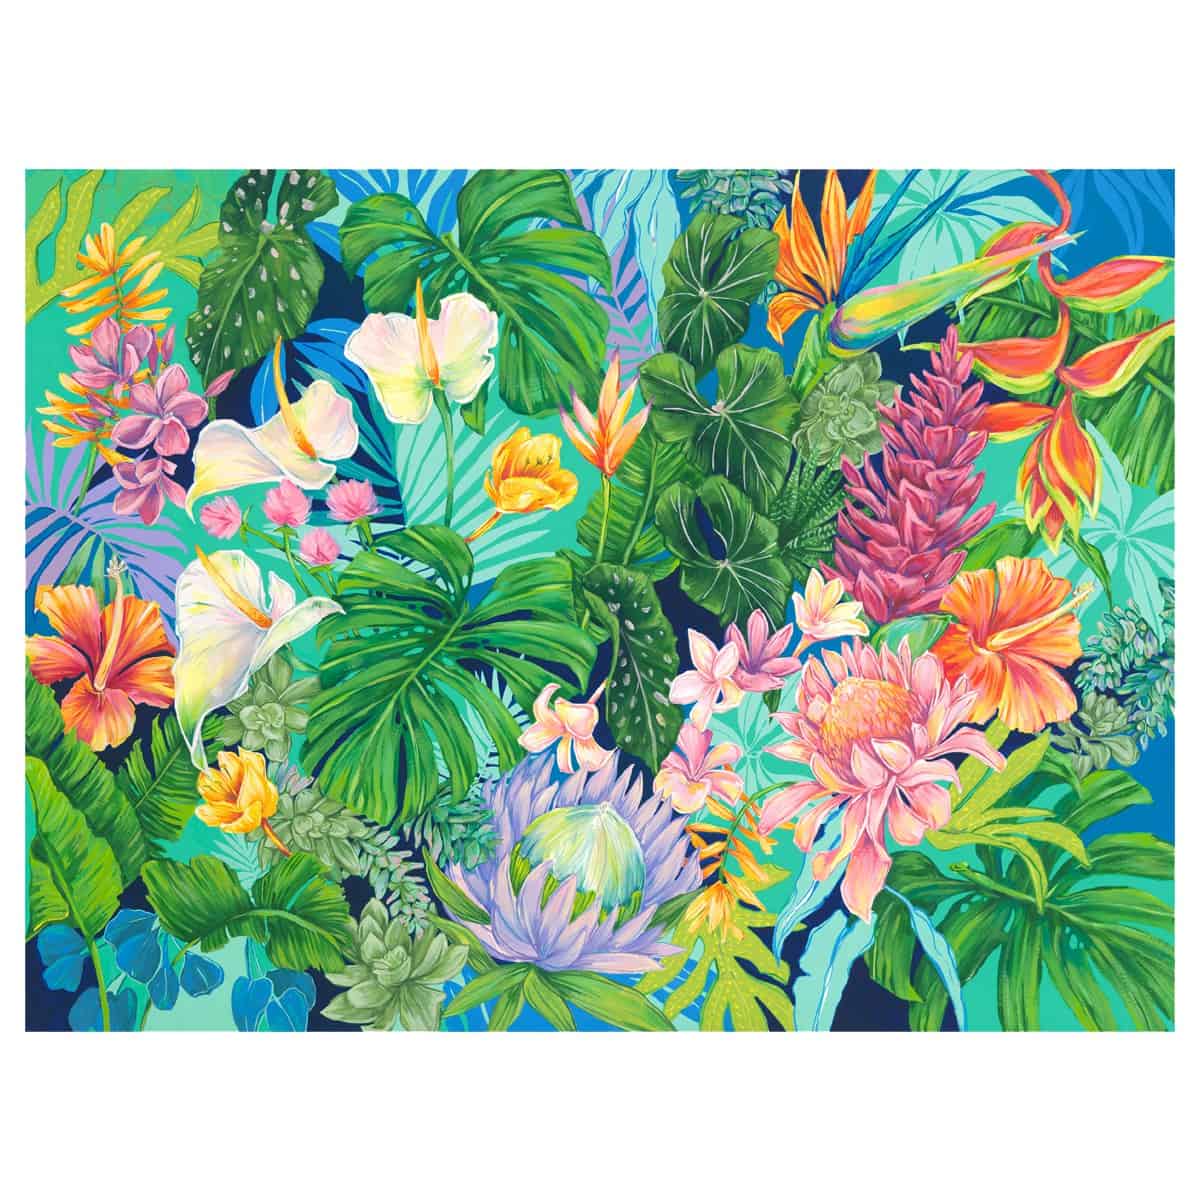 A bamboo art print of various layers and colors of Hawaii's lush tropical flora by Hawaii artist Lauren Roth